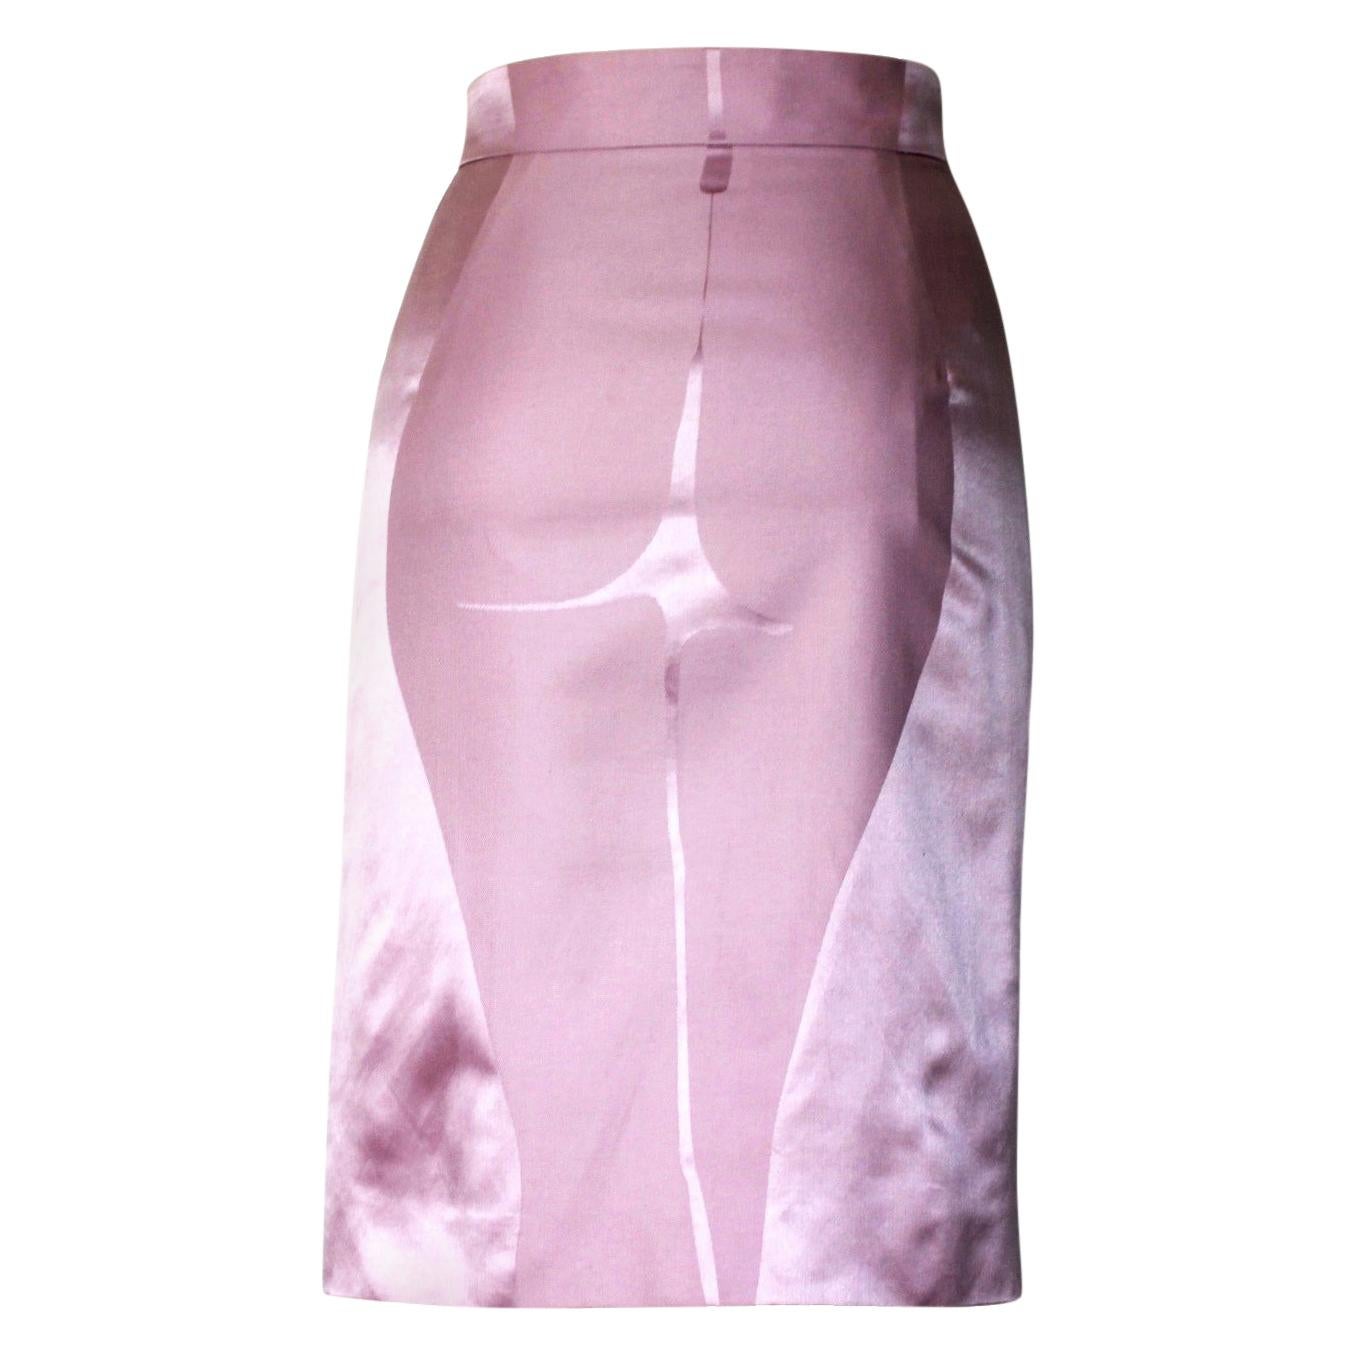 NEW Yves Saint Laurent Rive Gauche by Tom Ford SS 2003 Pink Derriere Skirt